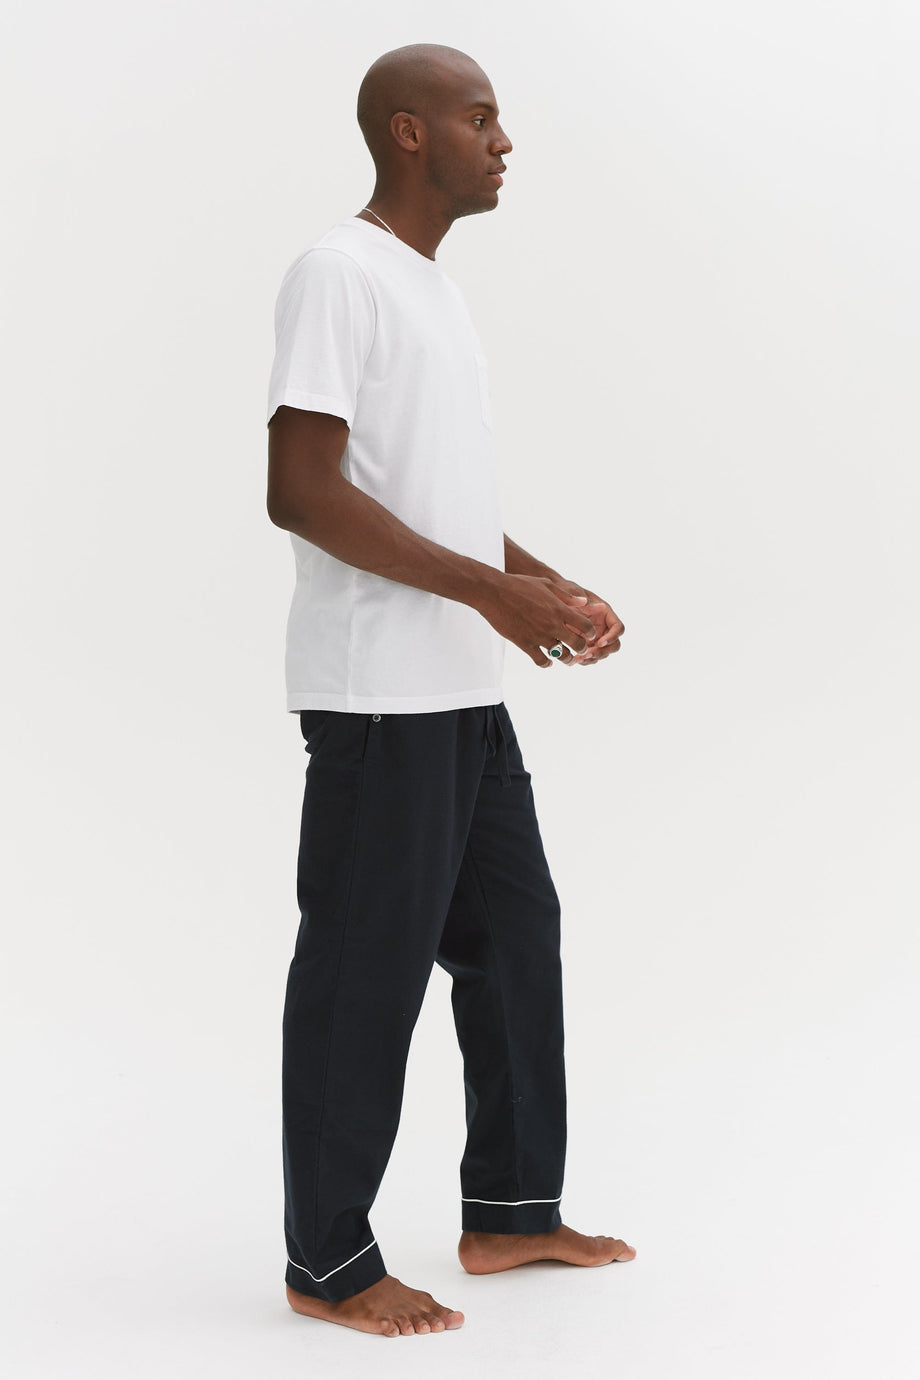 Men’s Tee and Trouser Set White/Brushed Cotton Navy